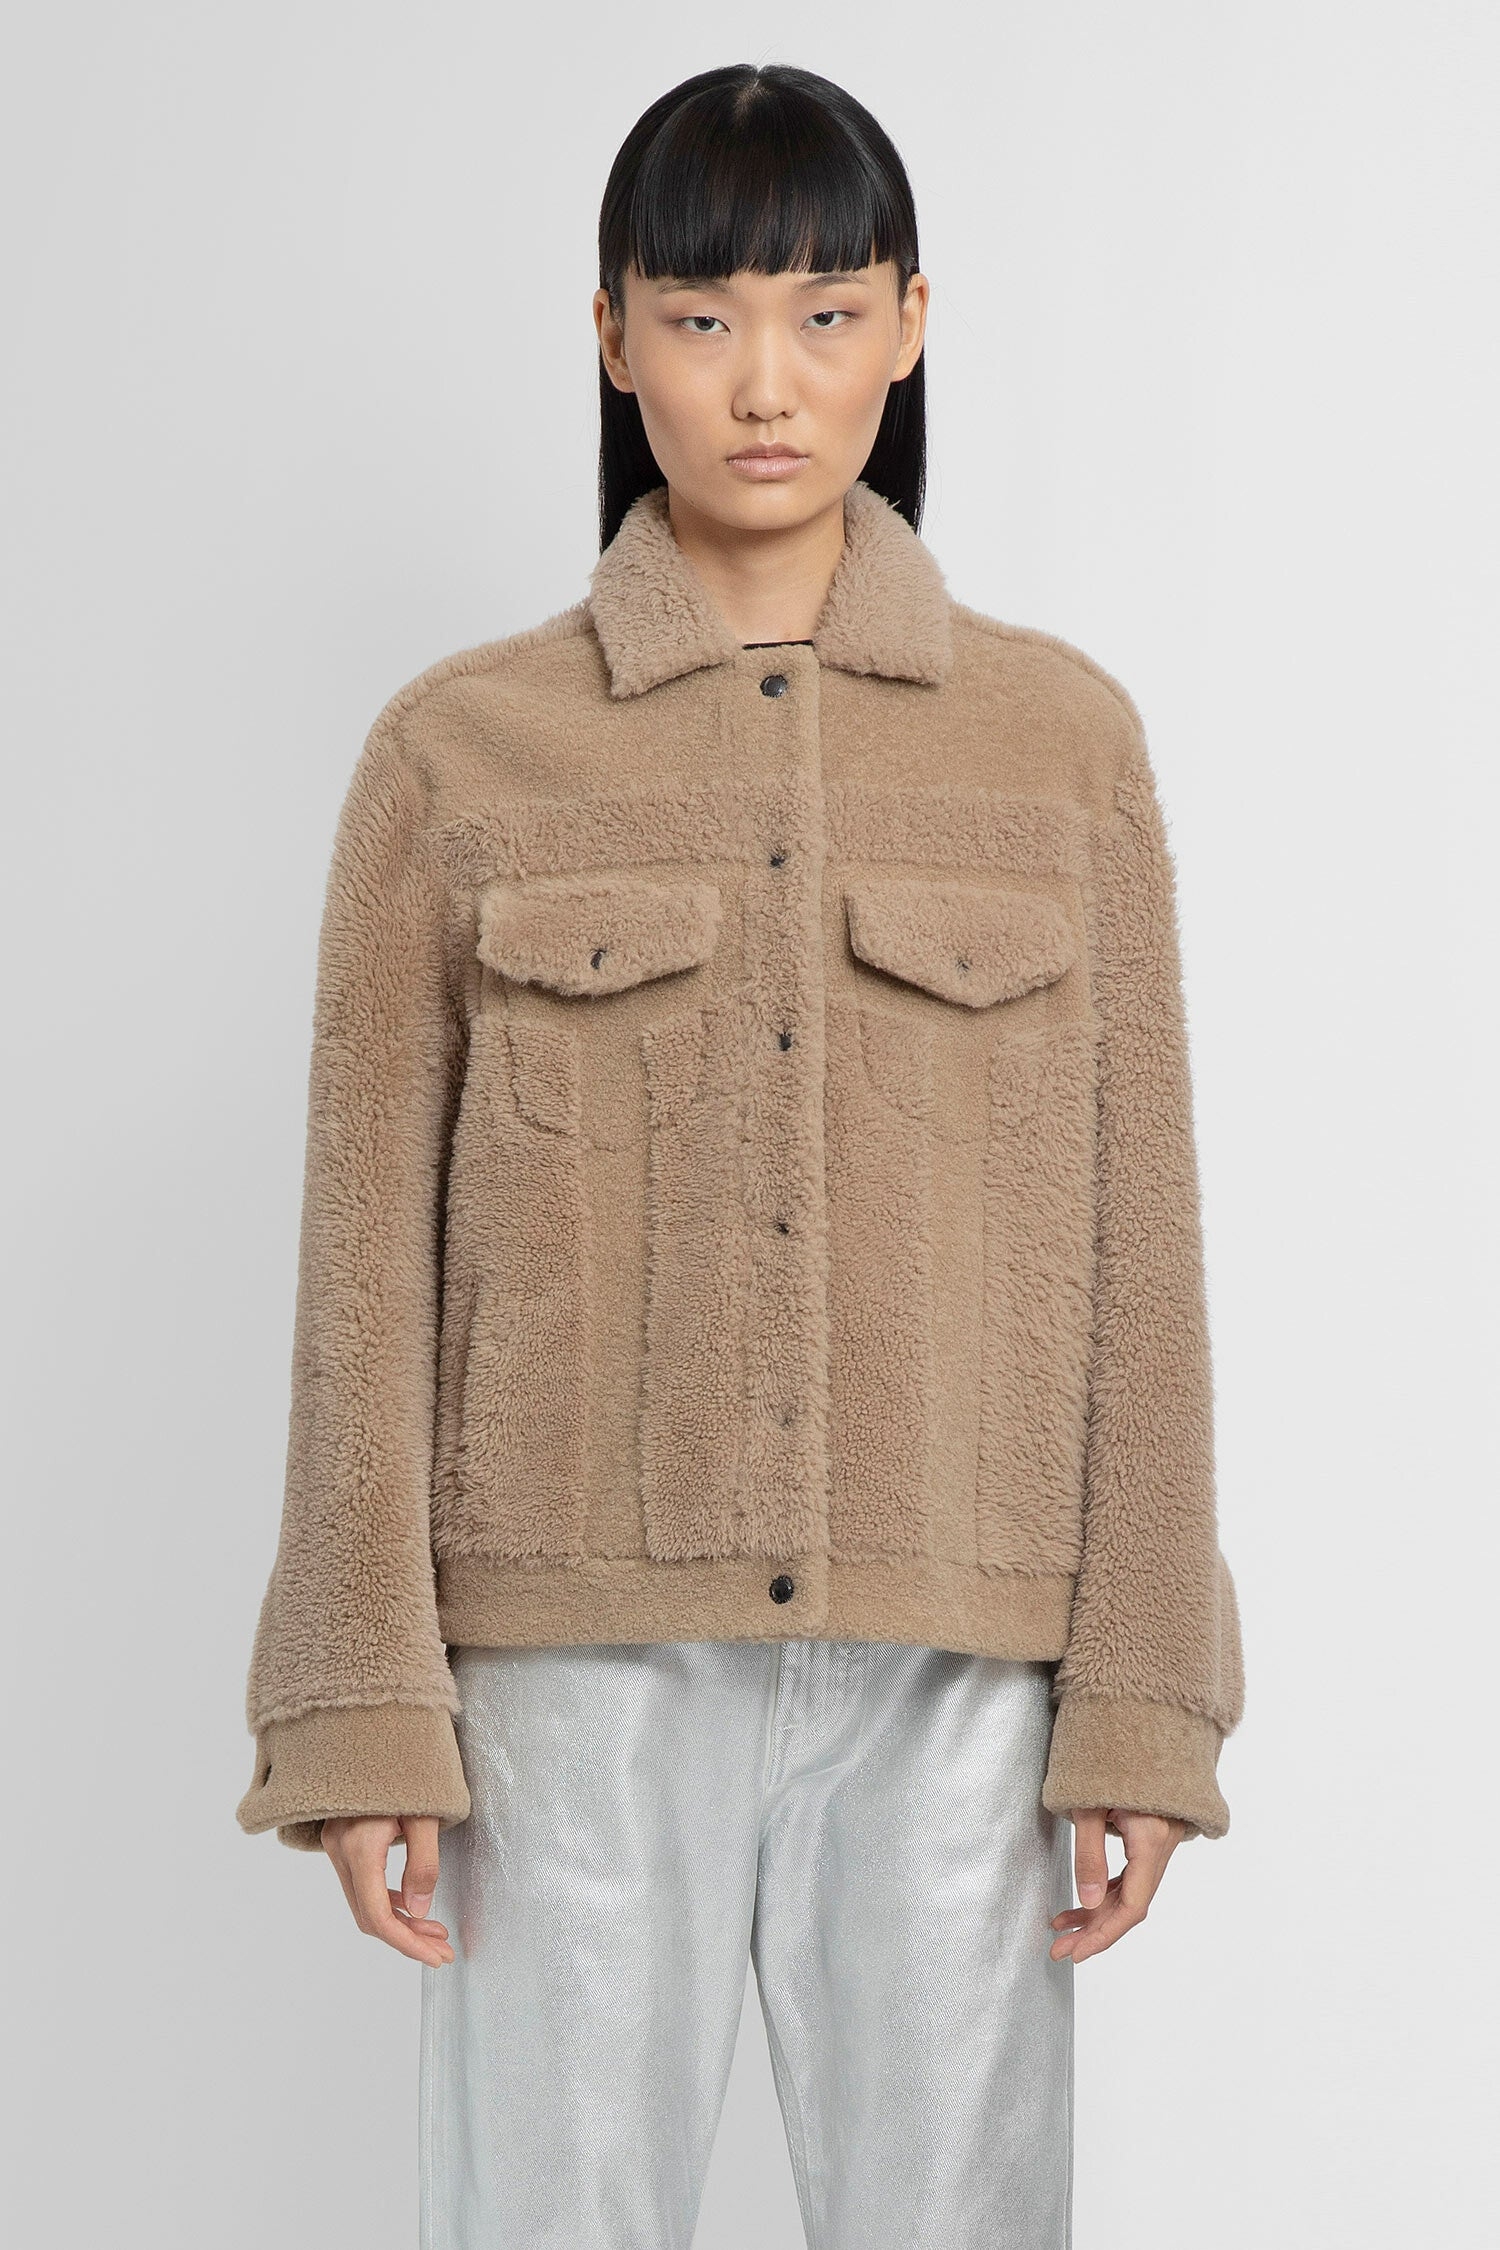 TOM FORD WOMAN BEIGE JACKETS